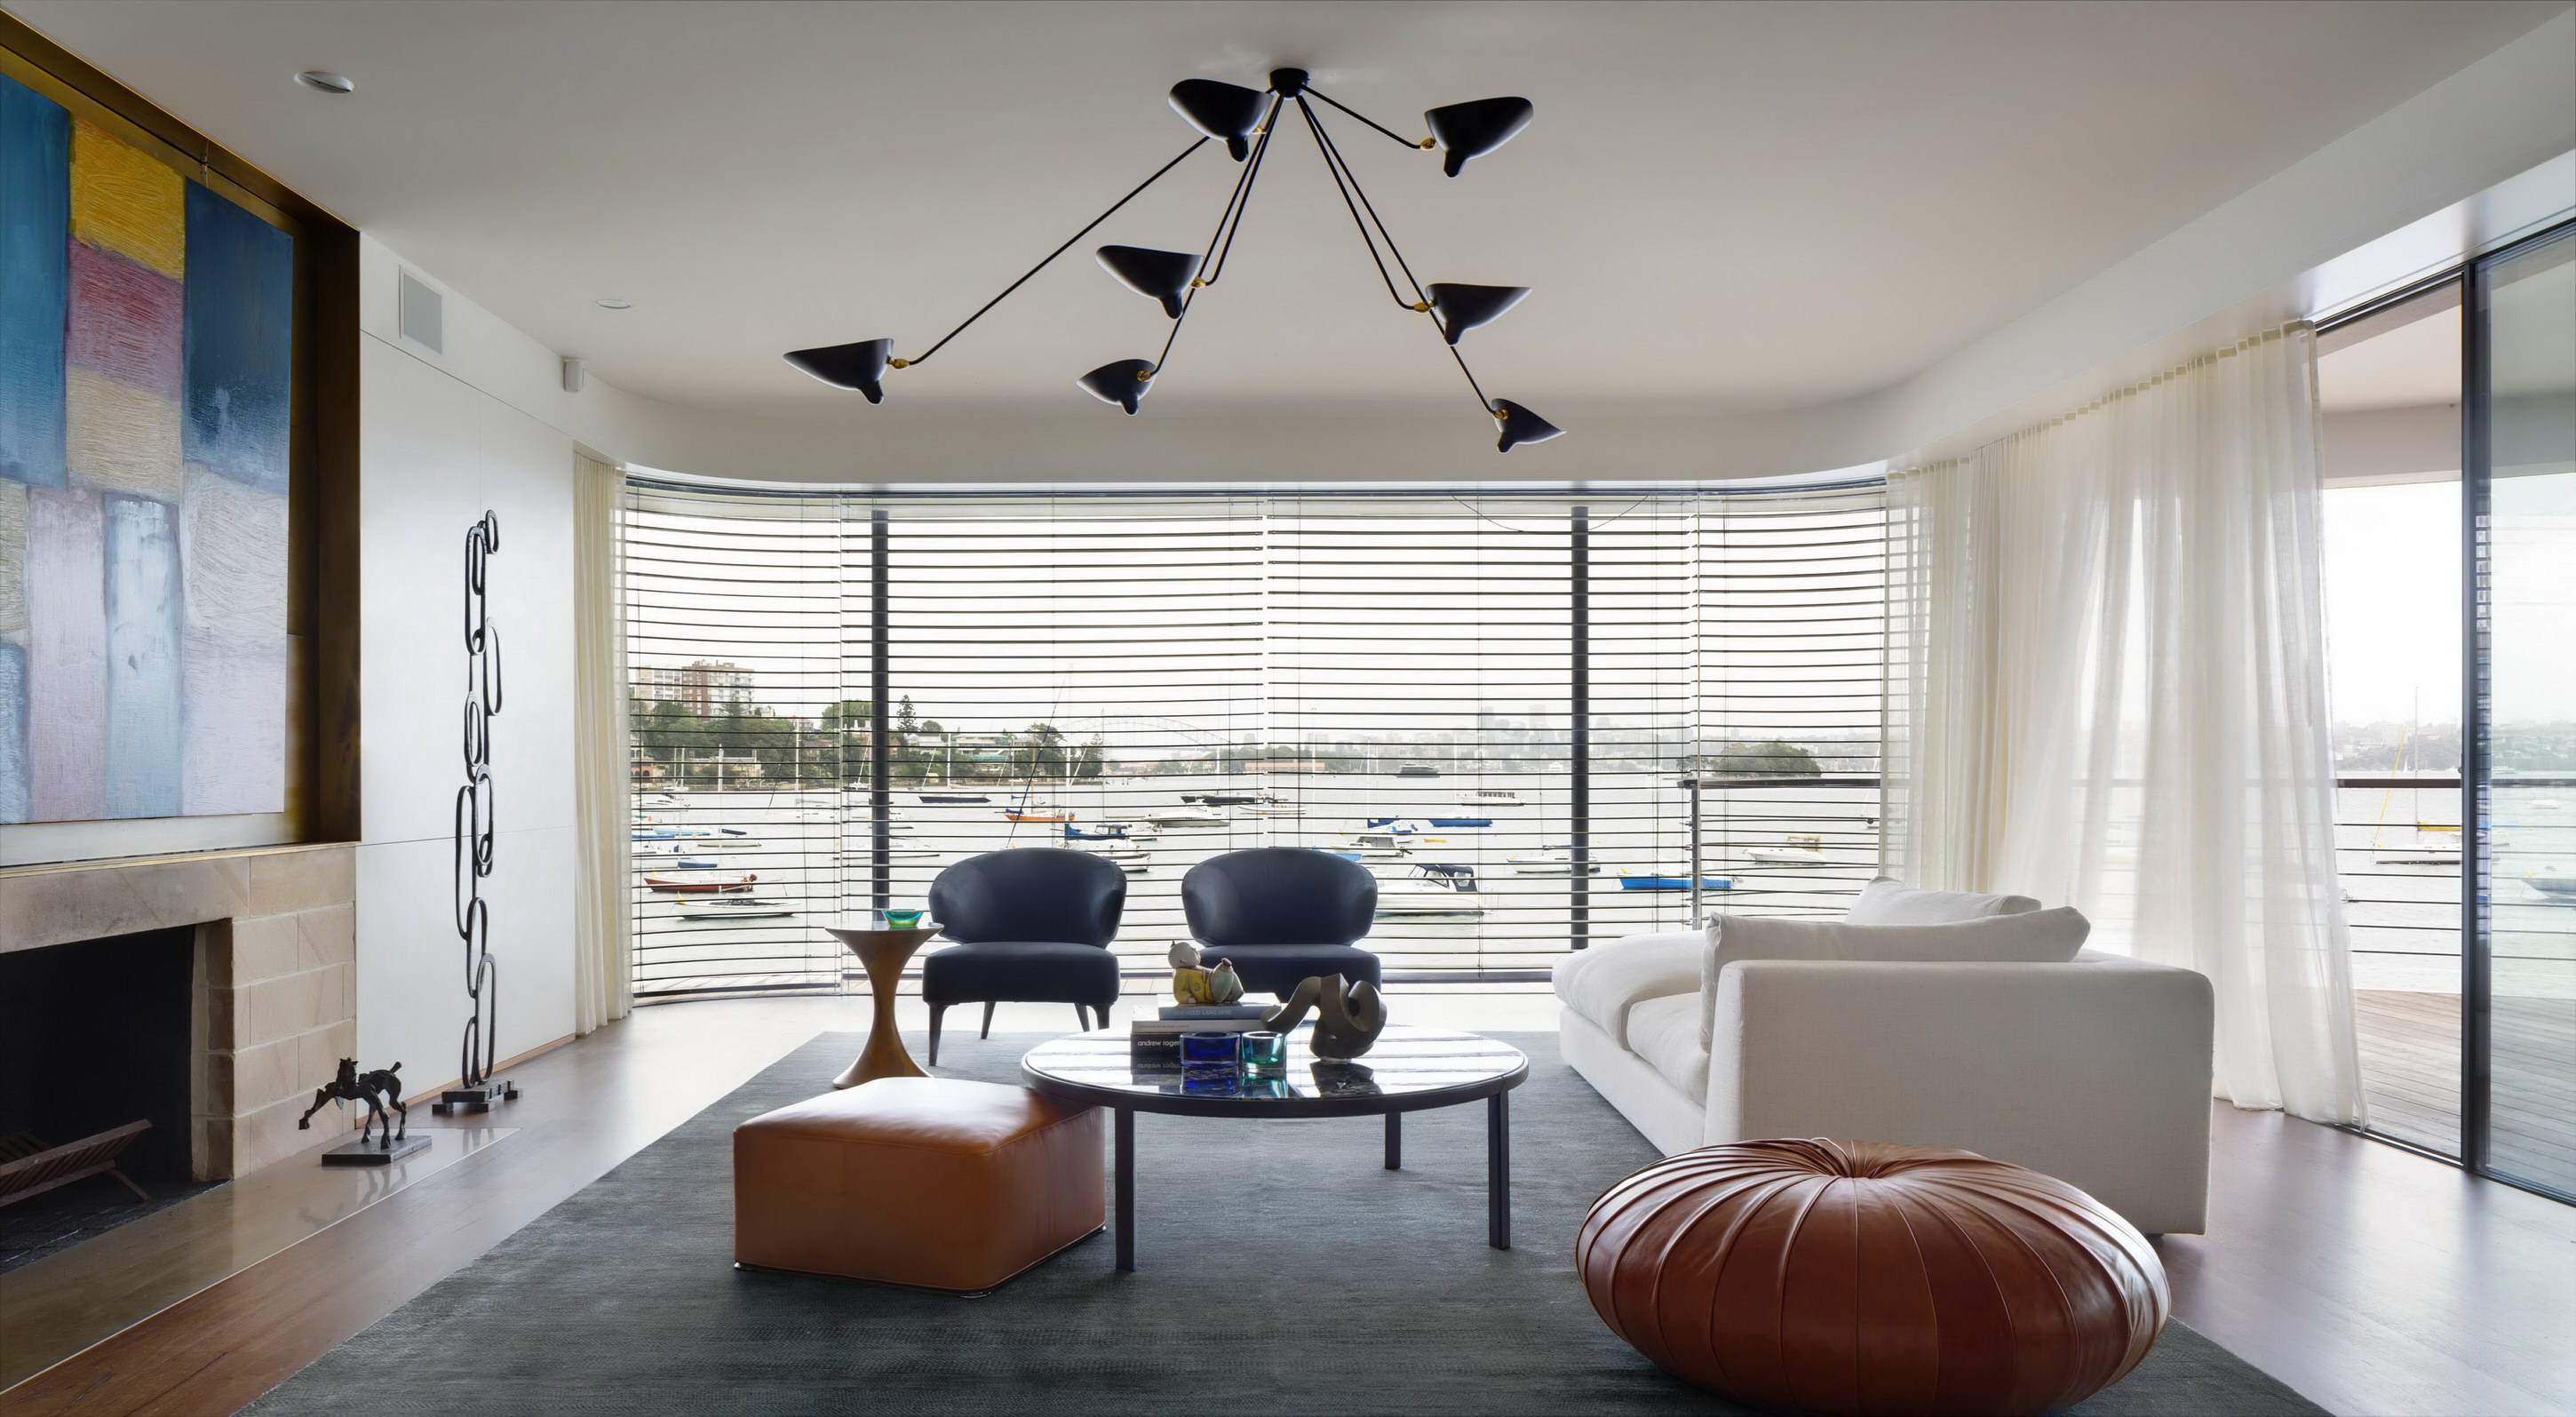 Harbour Front-Row Seat by Luigi Rosselli Architects